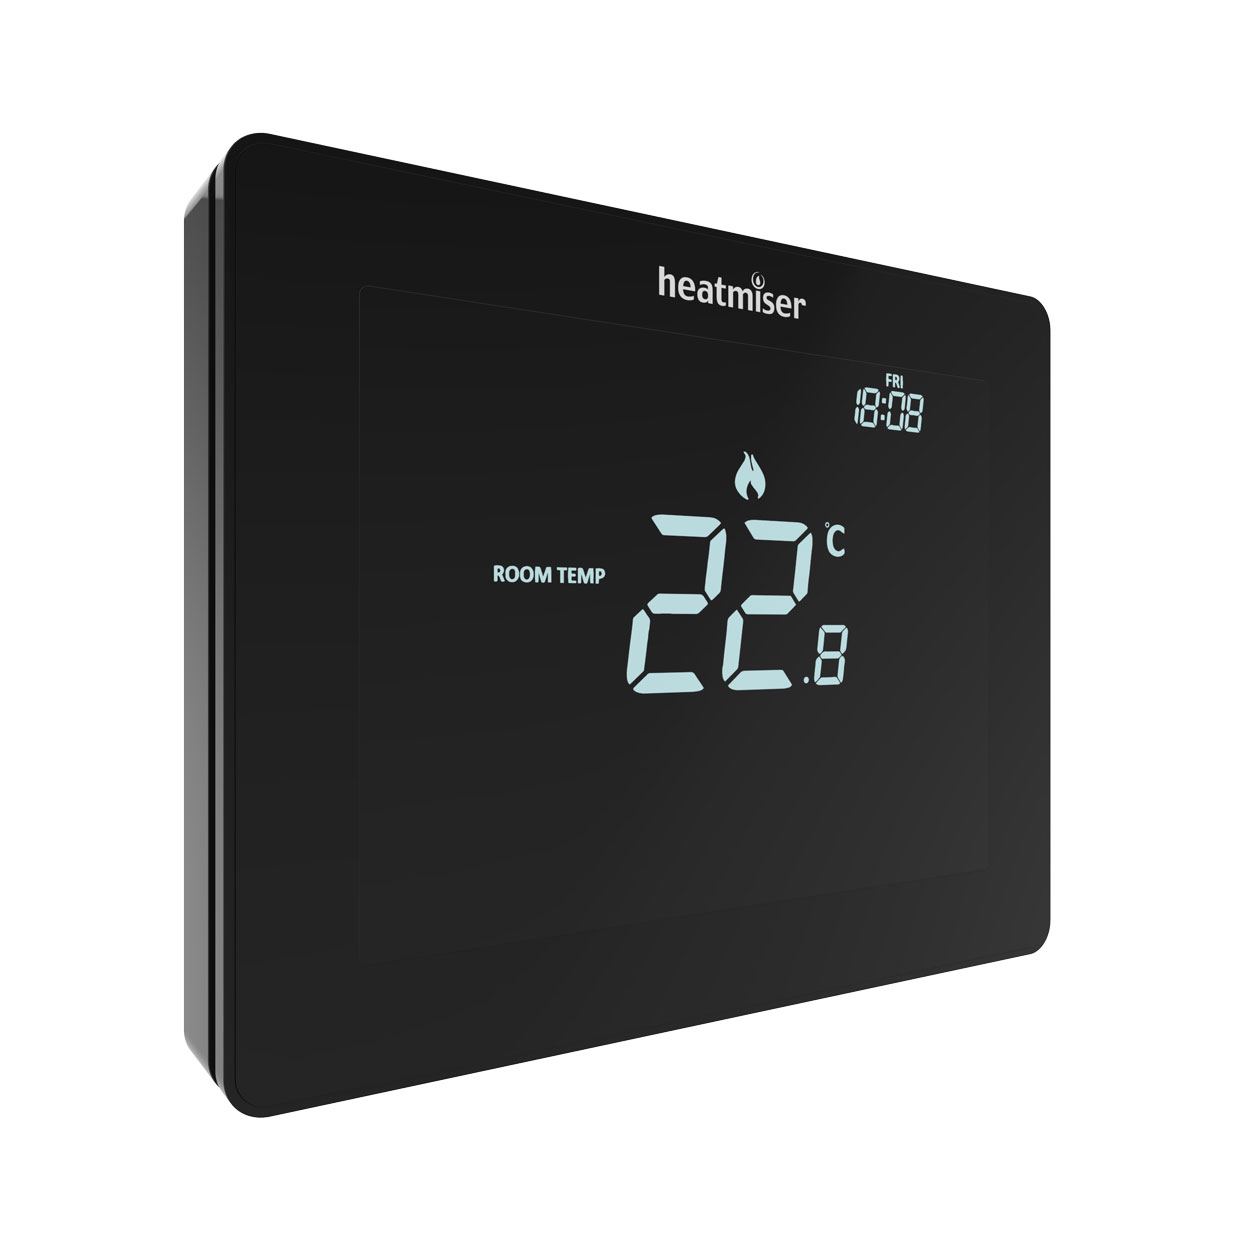 Heatmiser Multi-Mode Touchscreen Carbon Electric Floor Heating Thermostat